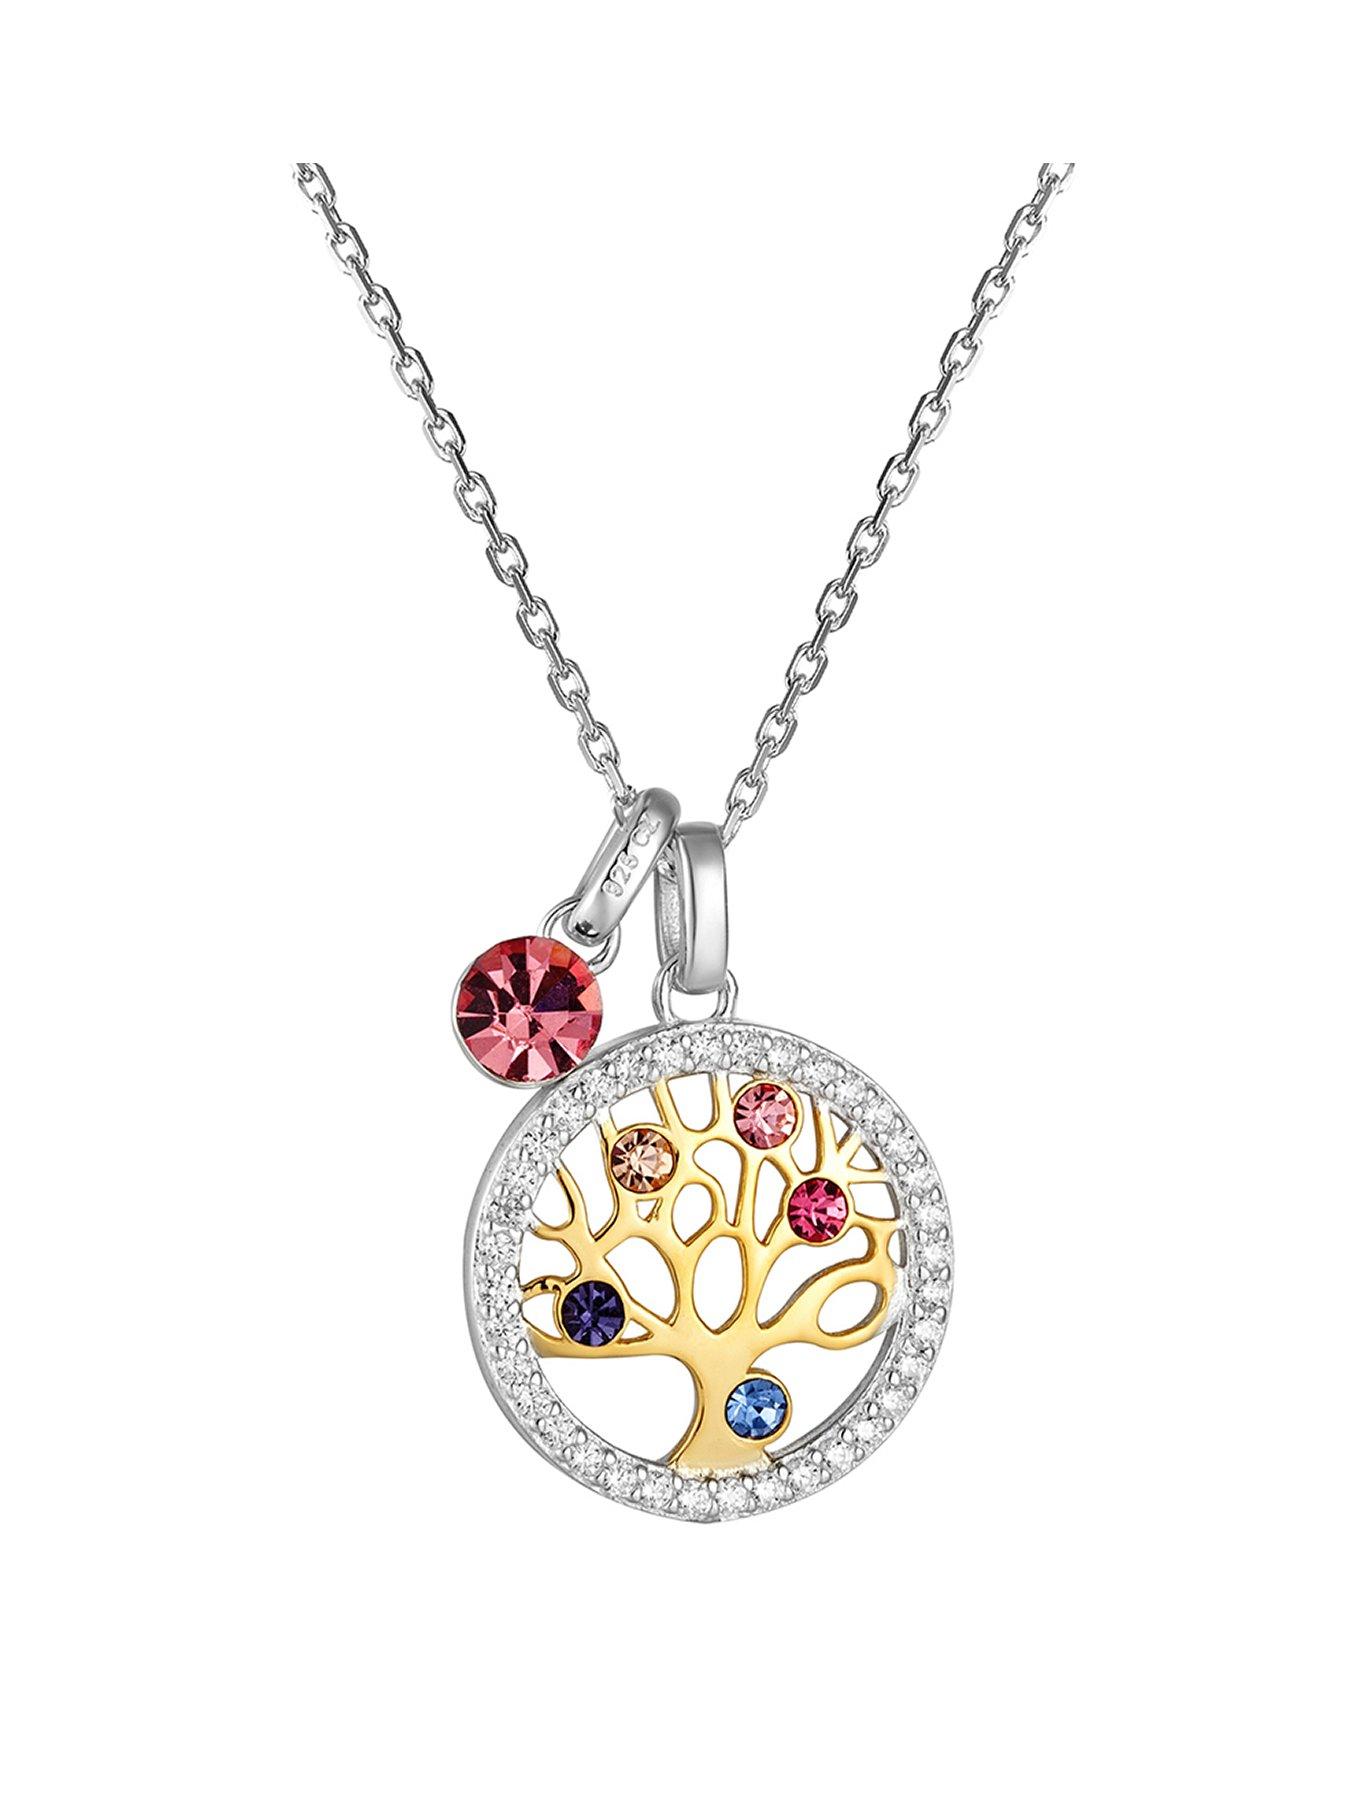 Details about  / .925 Sterling Silver Oval Red CZ Charm Pendant MSRP $131